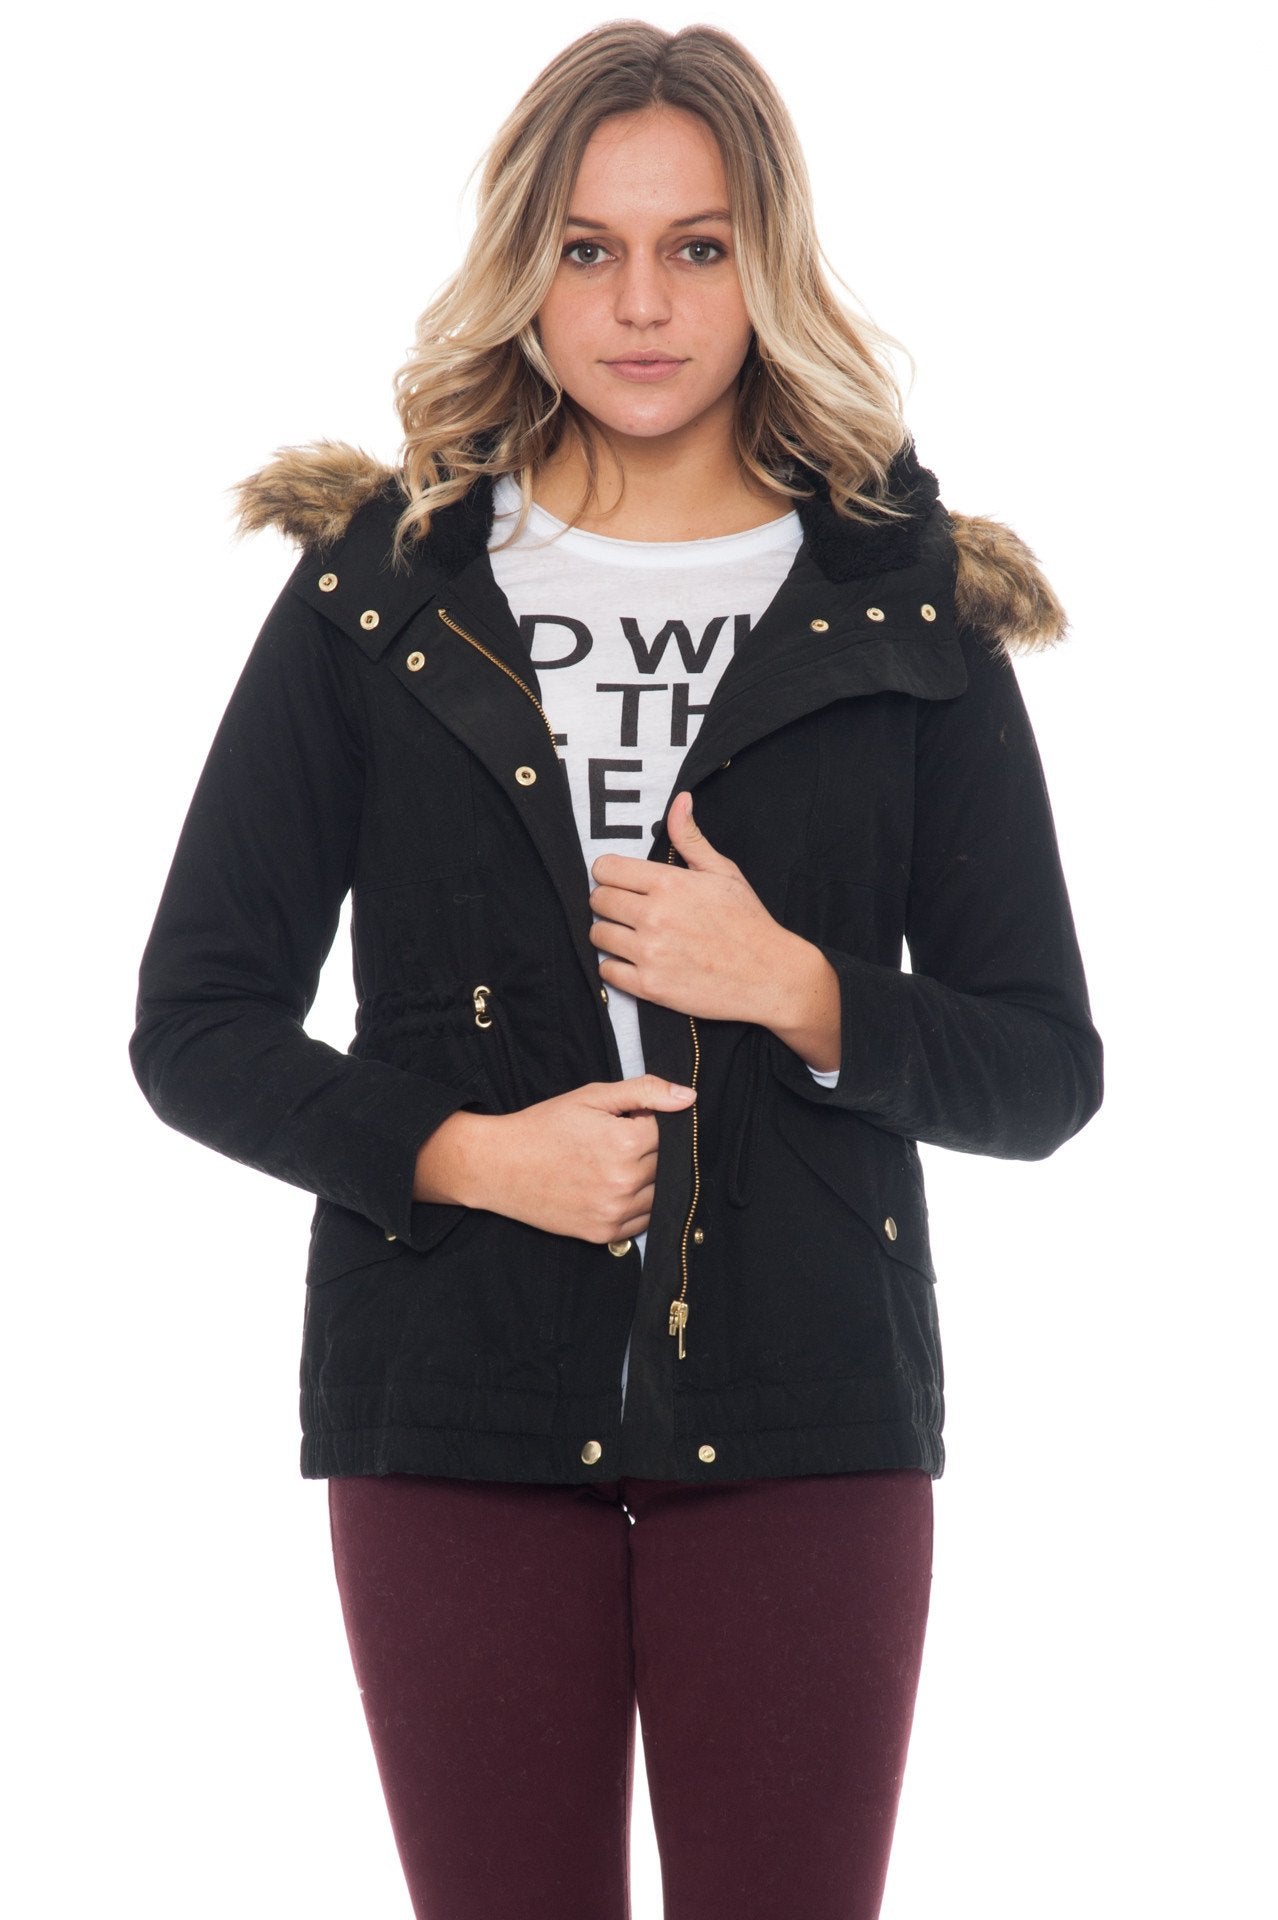 Jacket - Double Lined with Fur Hood and Full Length Zipper (Final Sale)